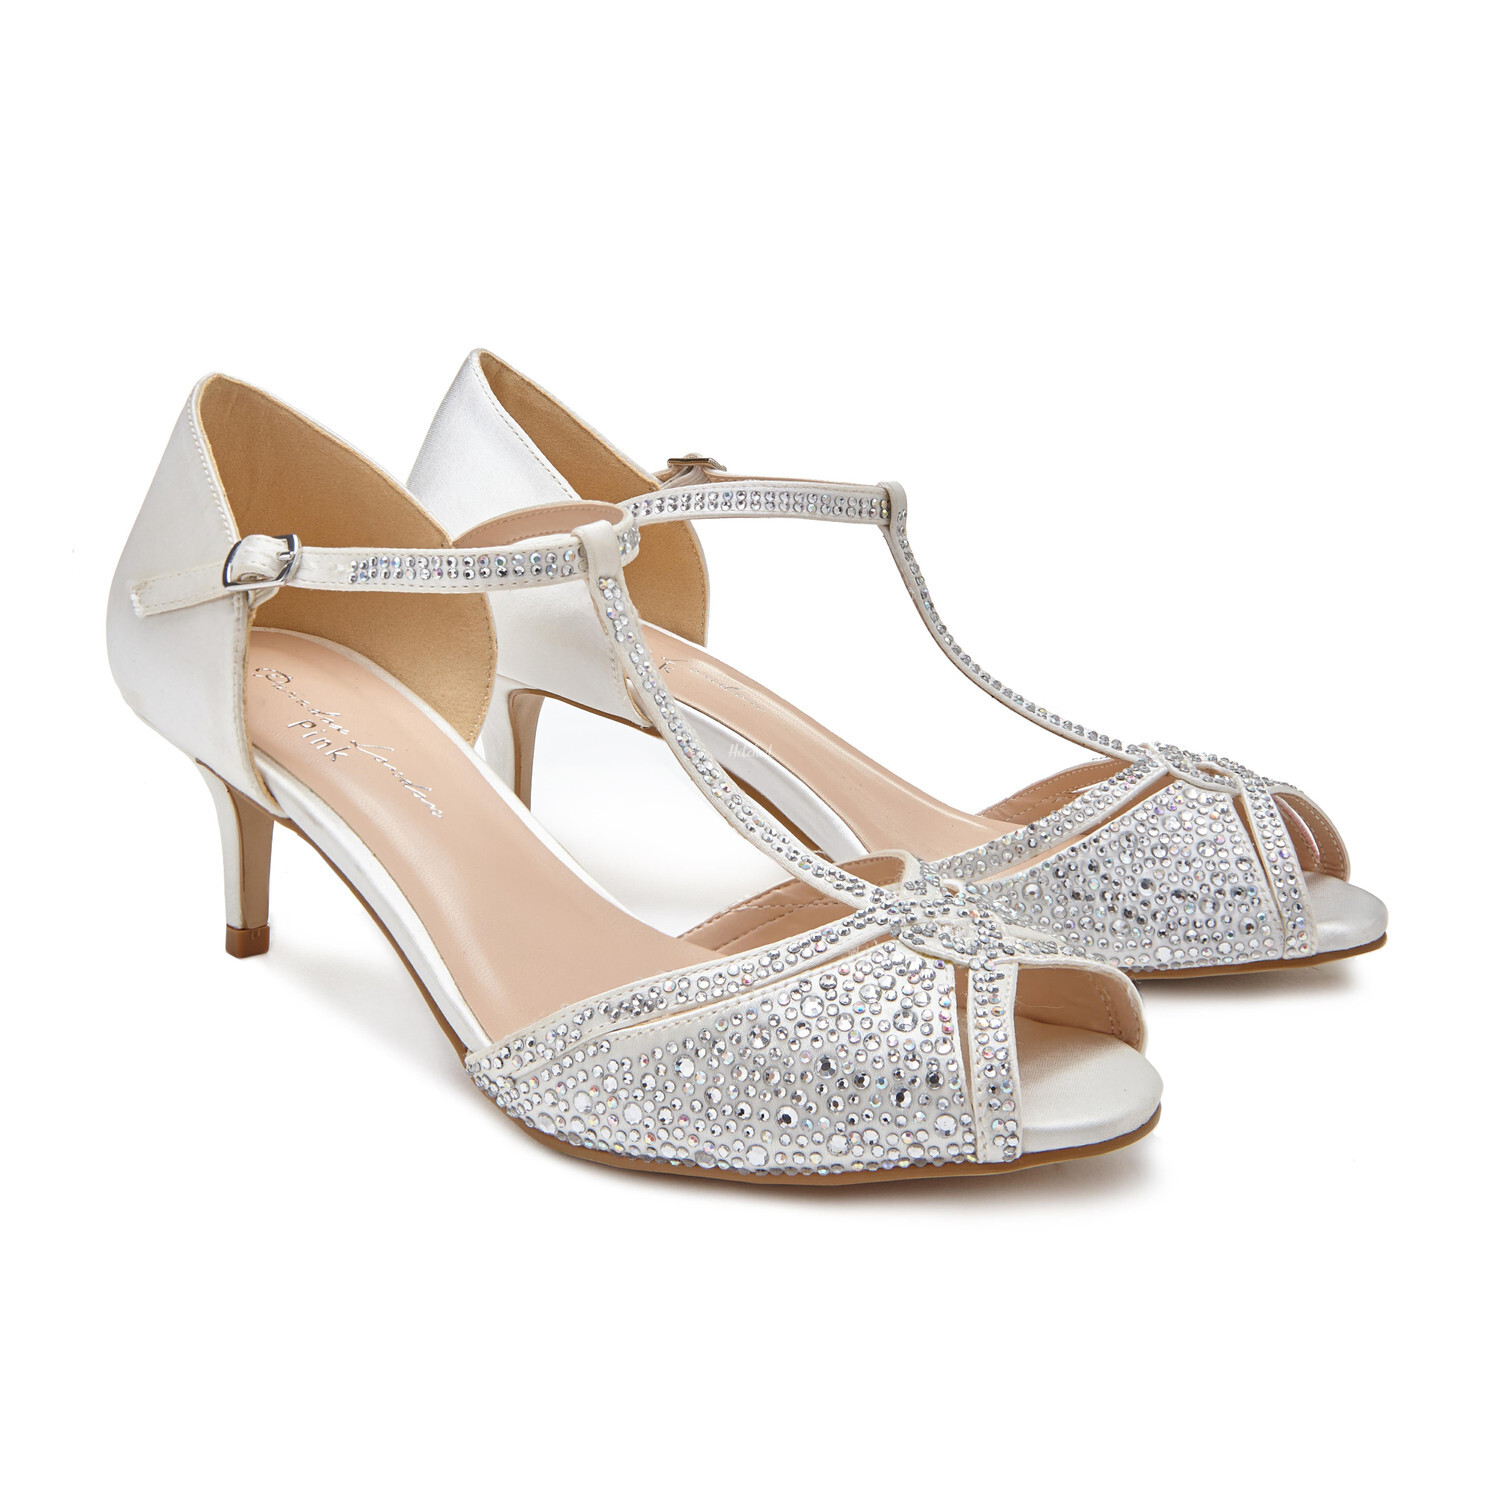 Laili Wide Fit Wedding Shoes from Paradox London Pink - hitched.co.uk